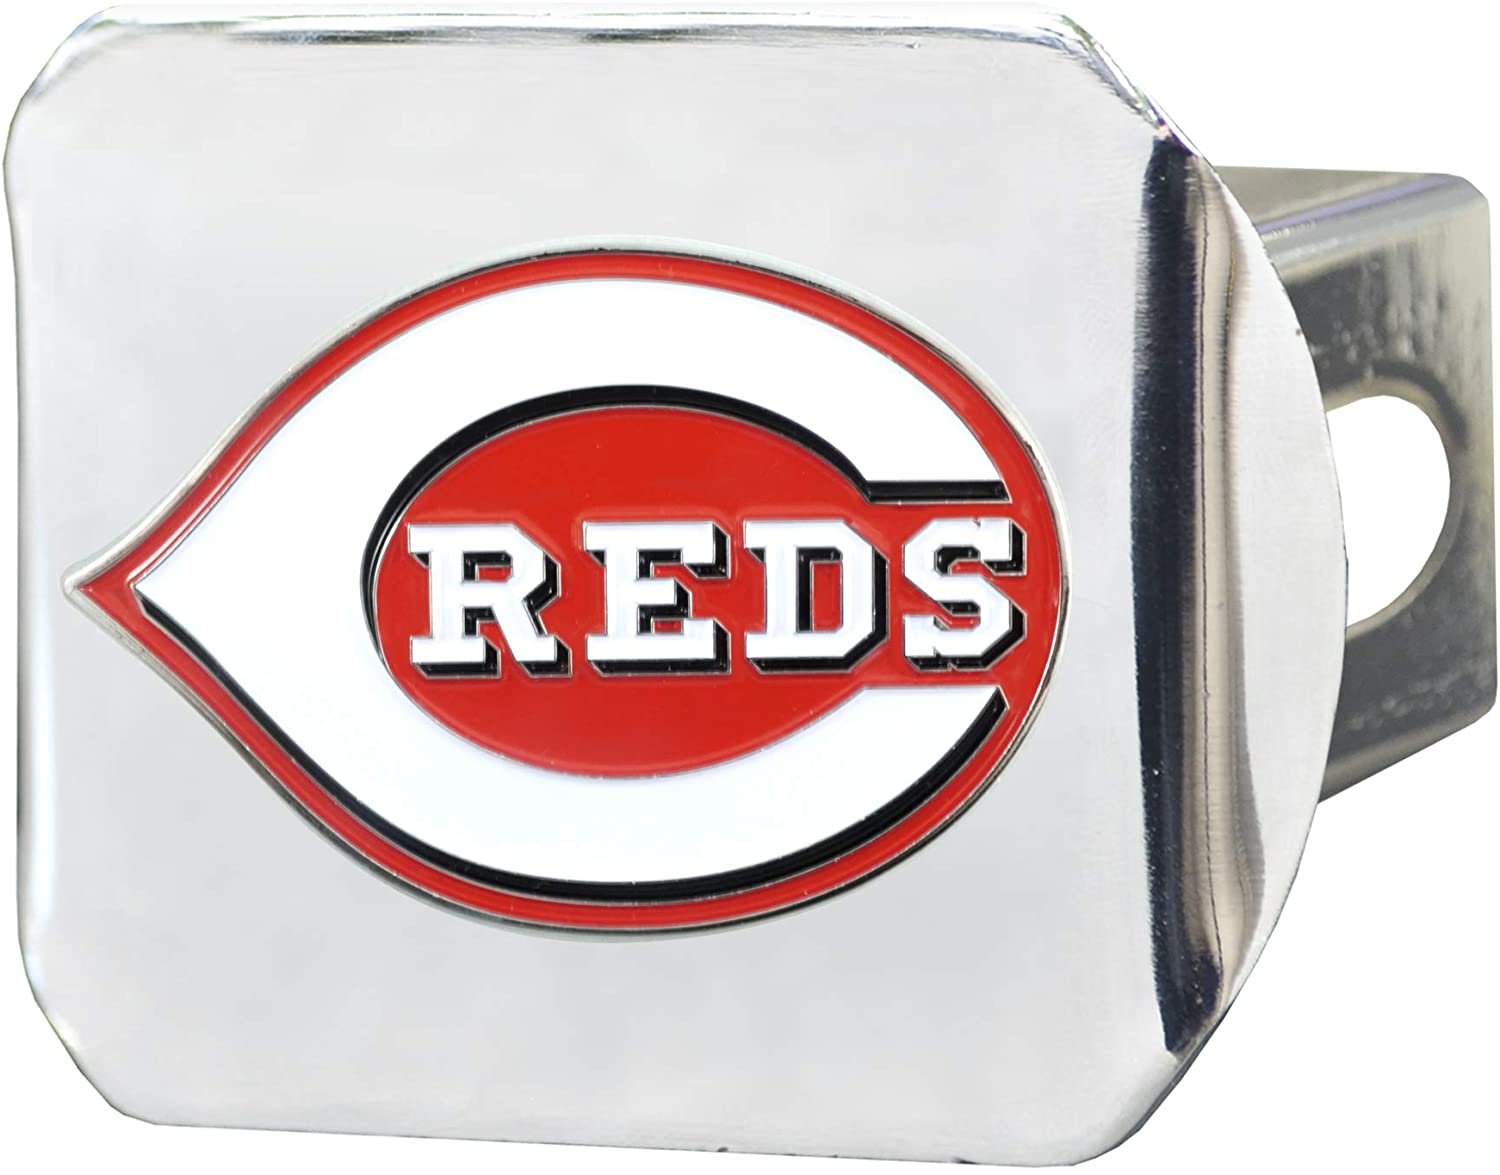 Cincinnati Reds Hitch Cover Solid Metal with Raised Color Metal Emblem 2" Square Type III